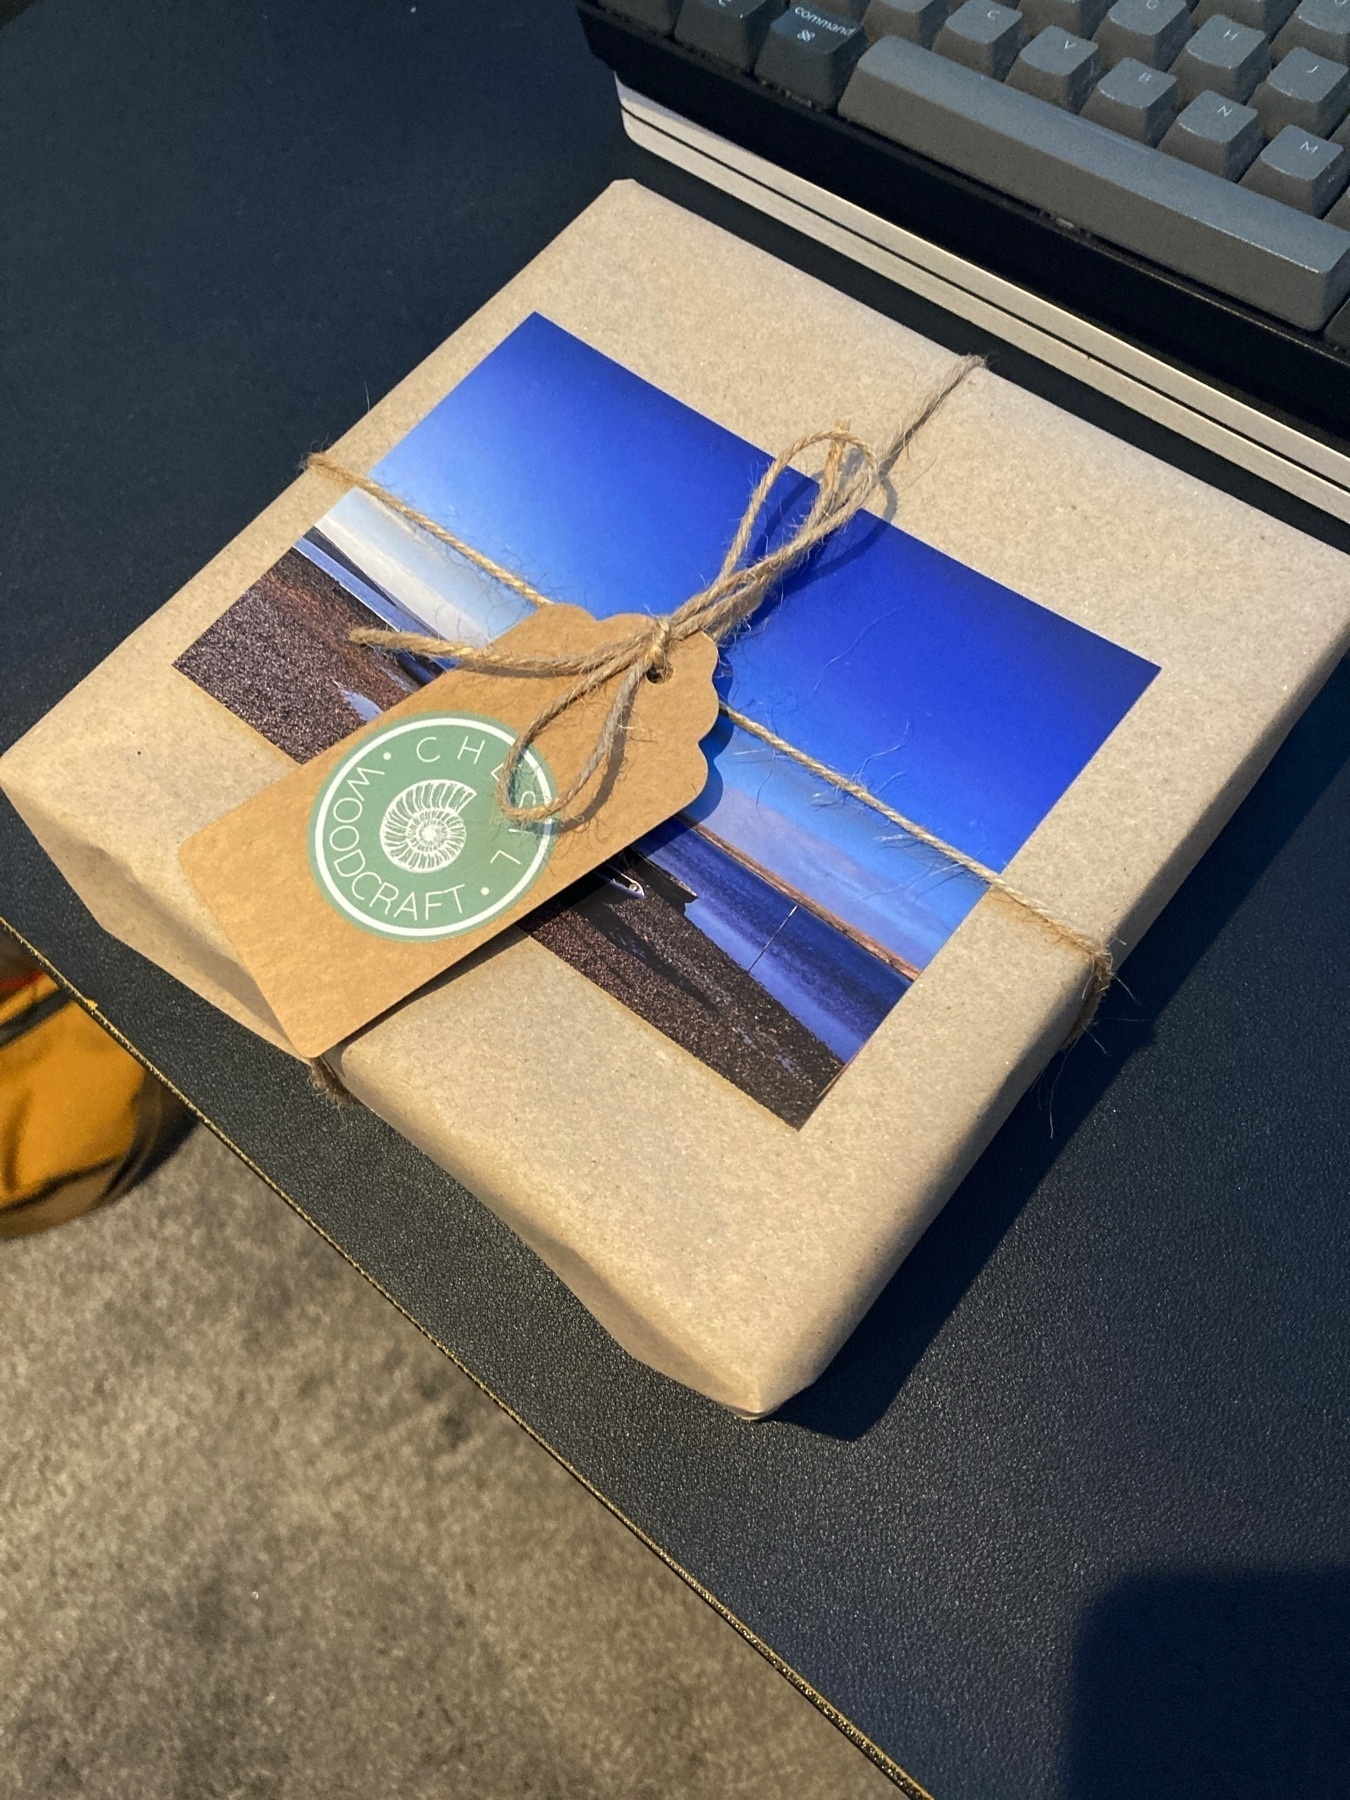 A wrapped parcel atop a table, in front of a keyboard. The wrapping is brown paper, with a postcard and tag attached via string. The sticker on the tag includes a seashell icon and the words “Chesil Woodcraft”.